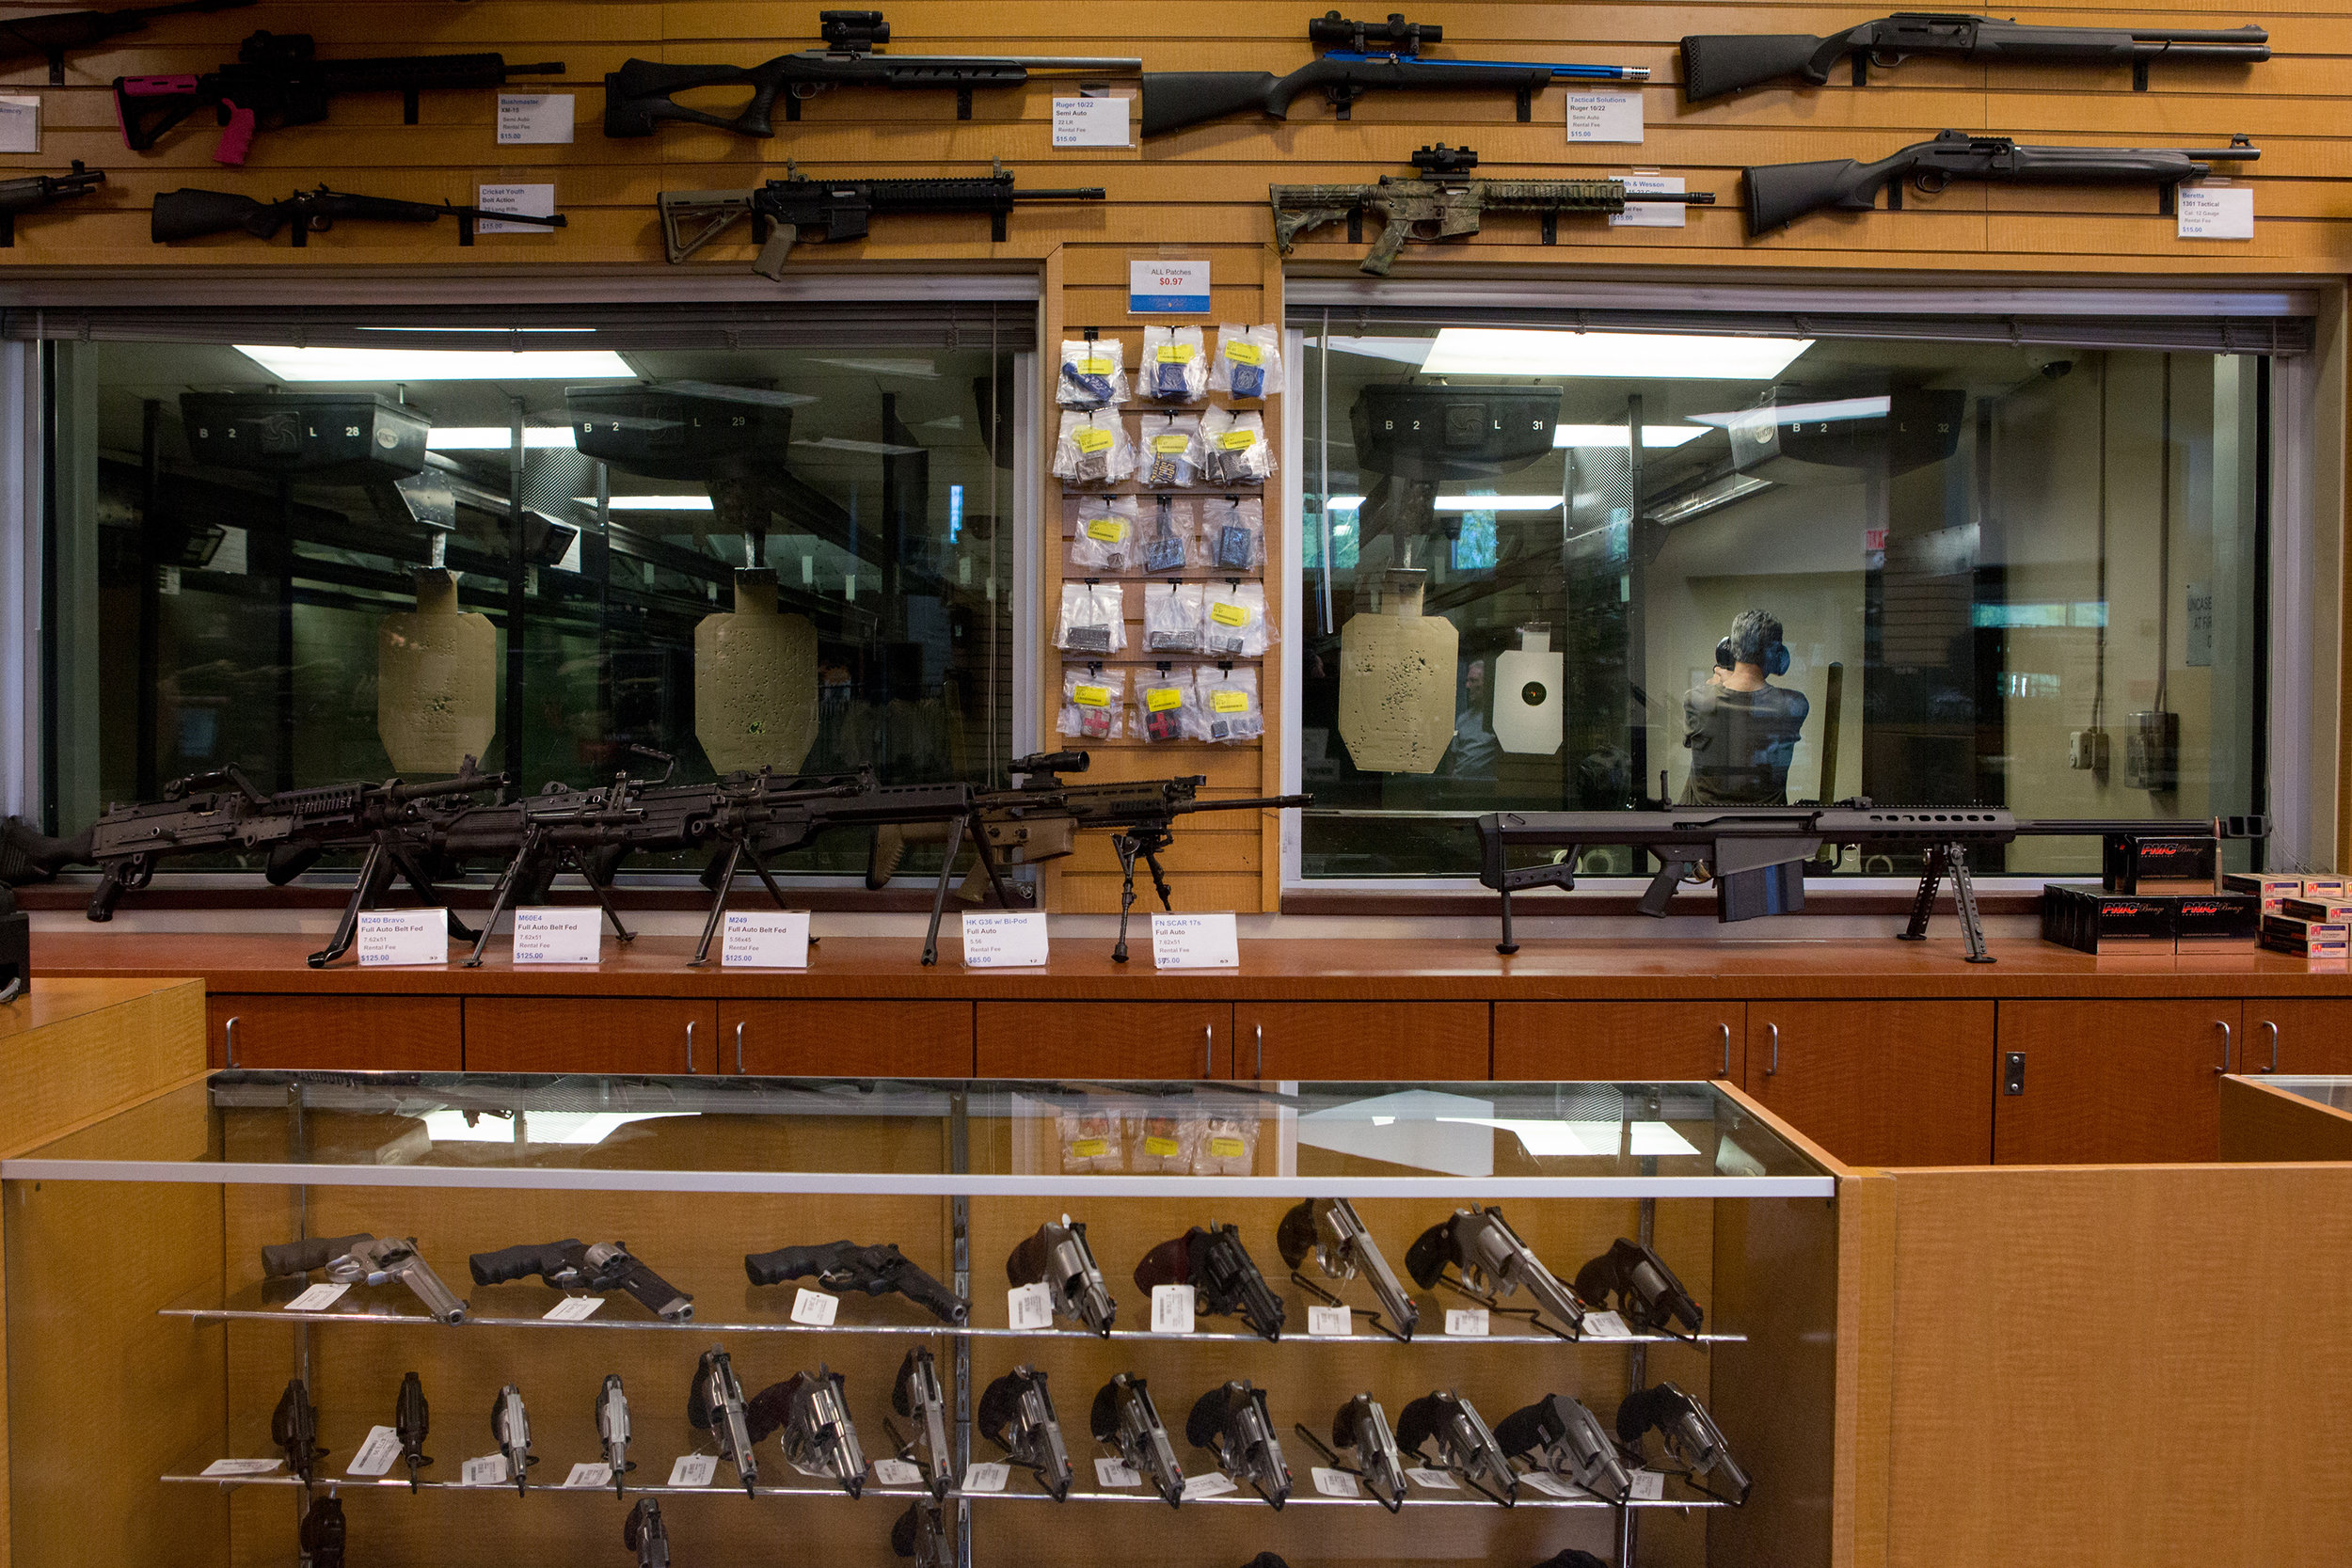  A man shoots targets at the Scottsdale Gun Club on April 18, 2016, in Scottsdale, Arizona. In the front of the store, the 14-year-old gun club sells guns and gear, and in the back, there are 32 indoor 25-yard shooting lanes. The club also holds cour